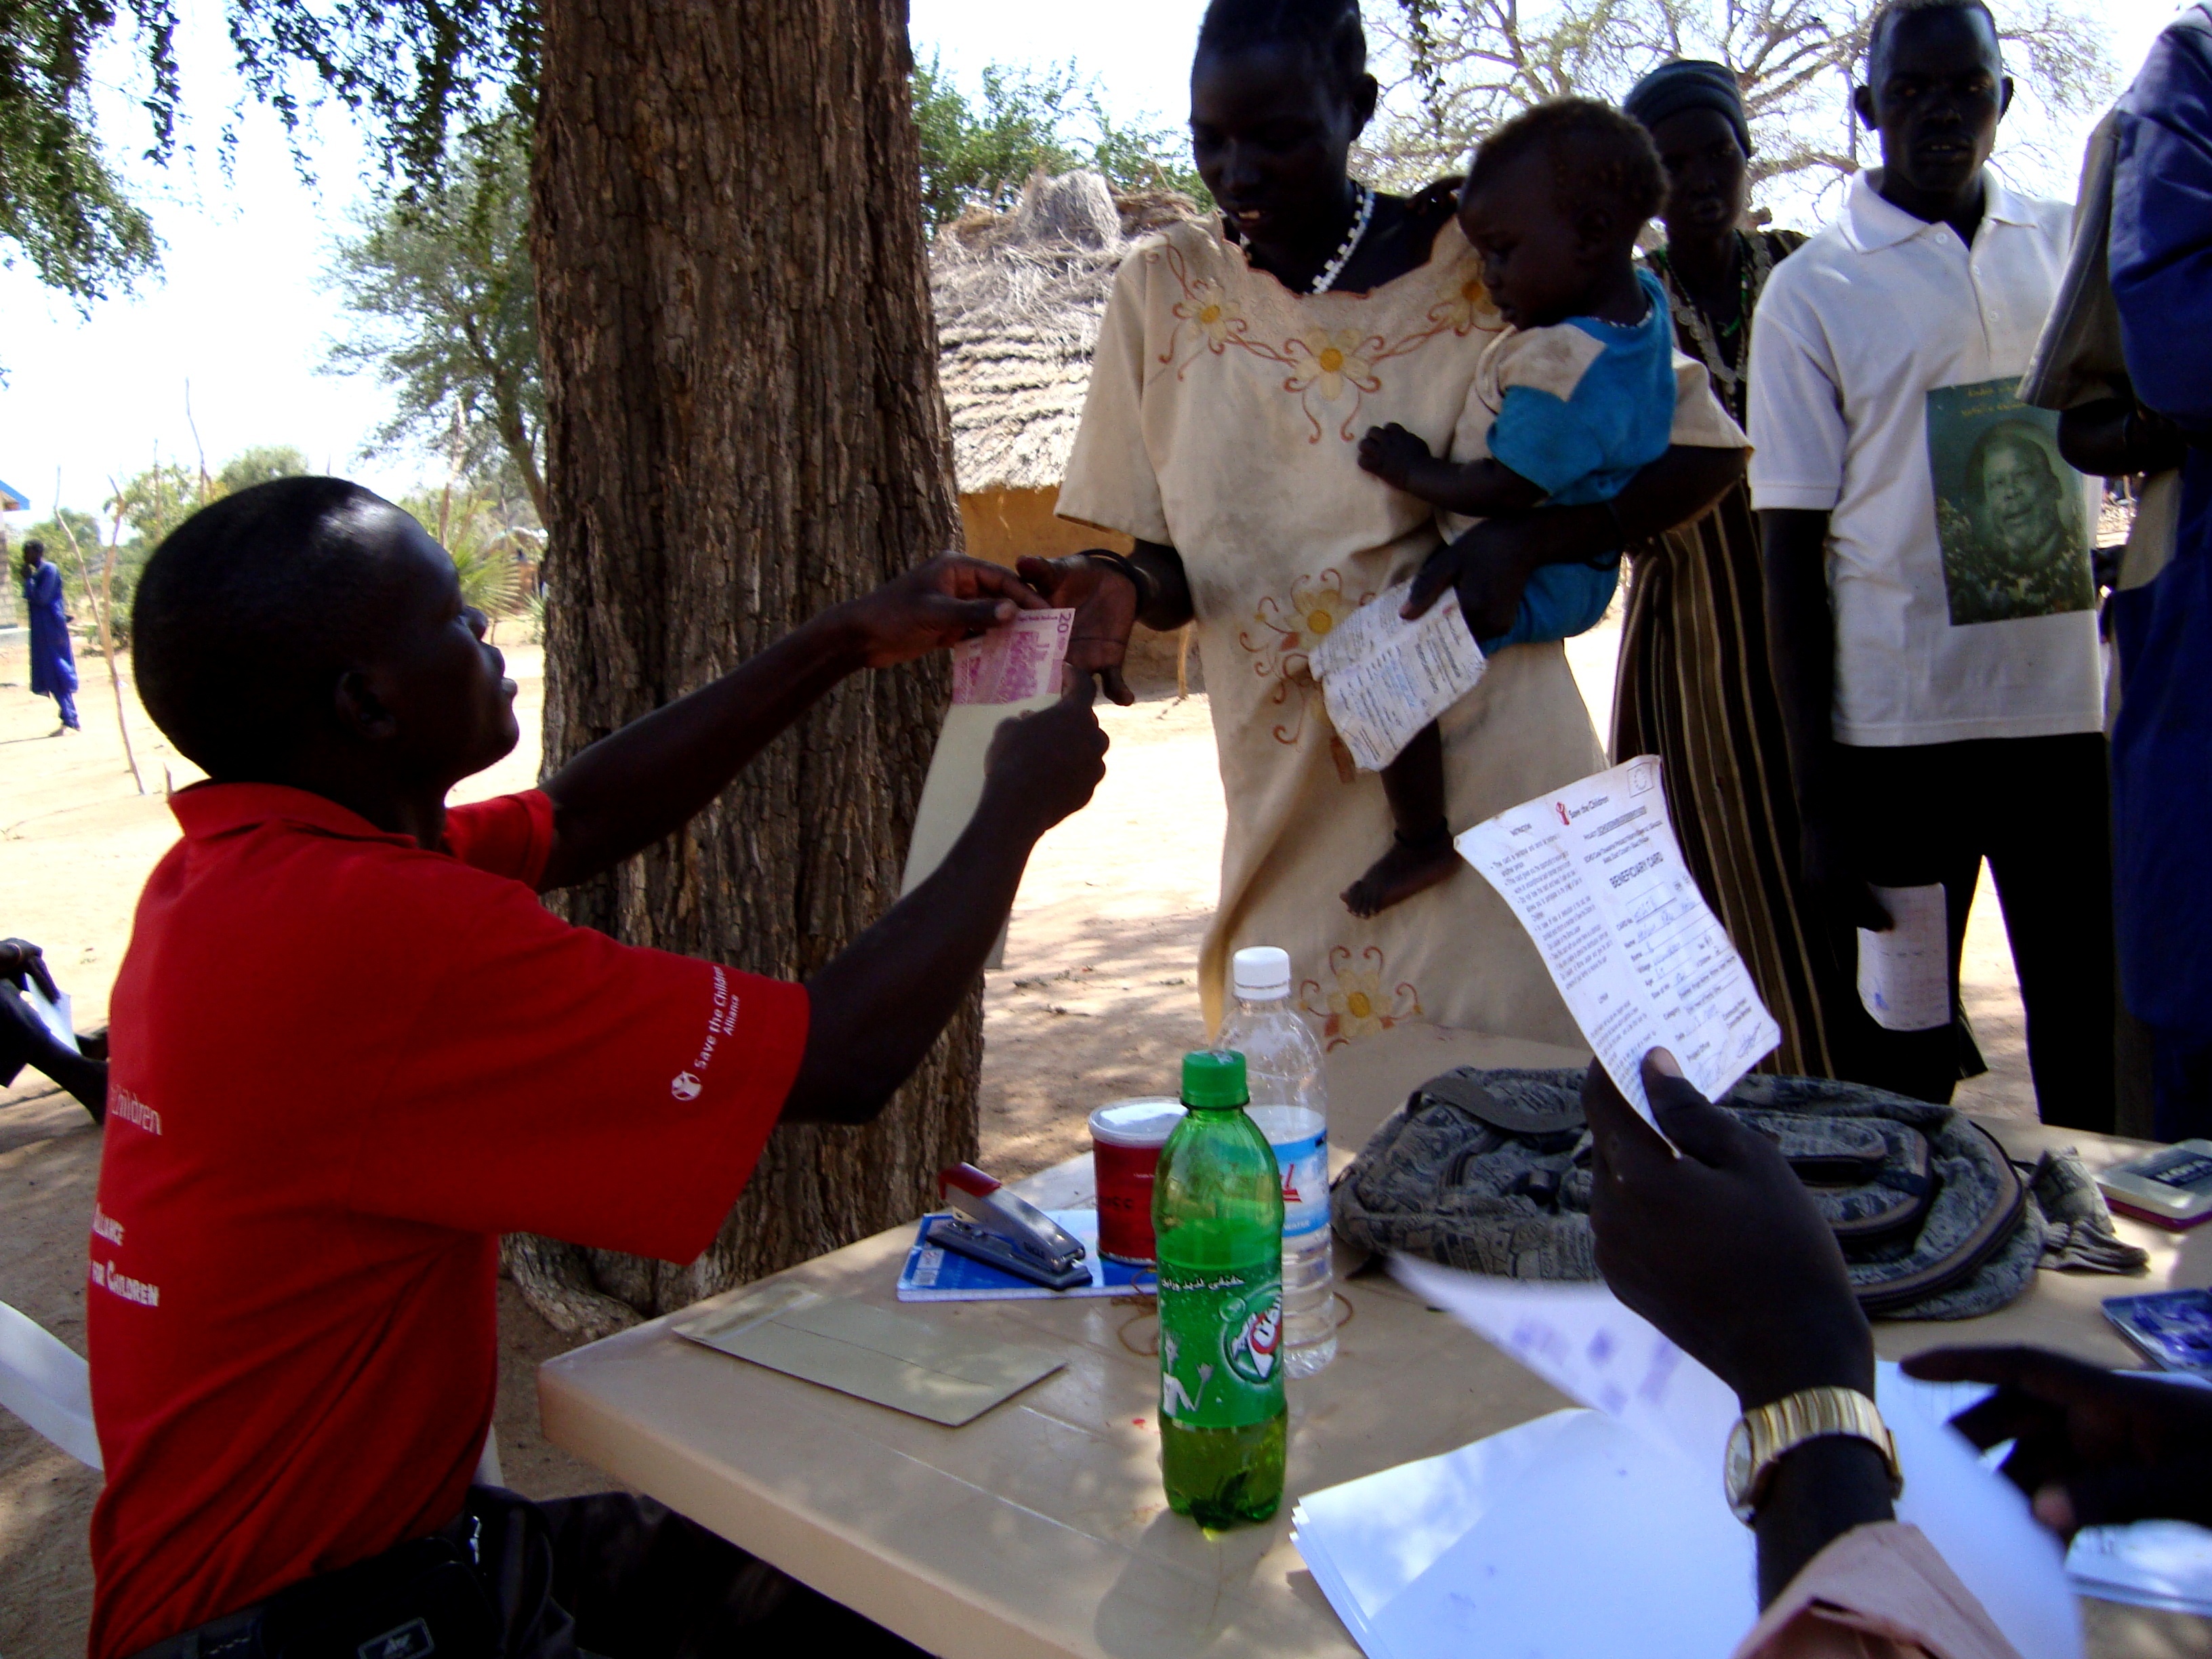 A Save the Children worker dispensing monetary aid in 2008 to families in South Sudan